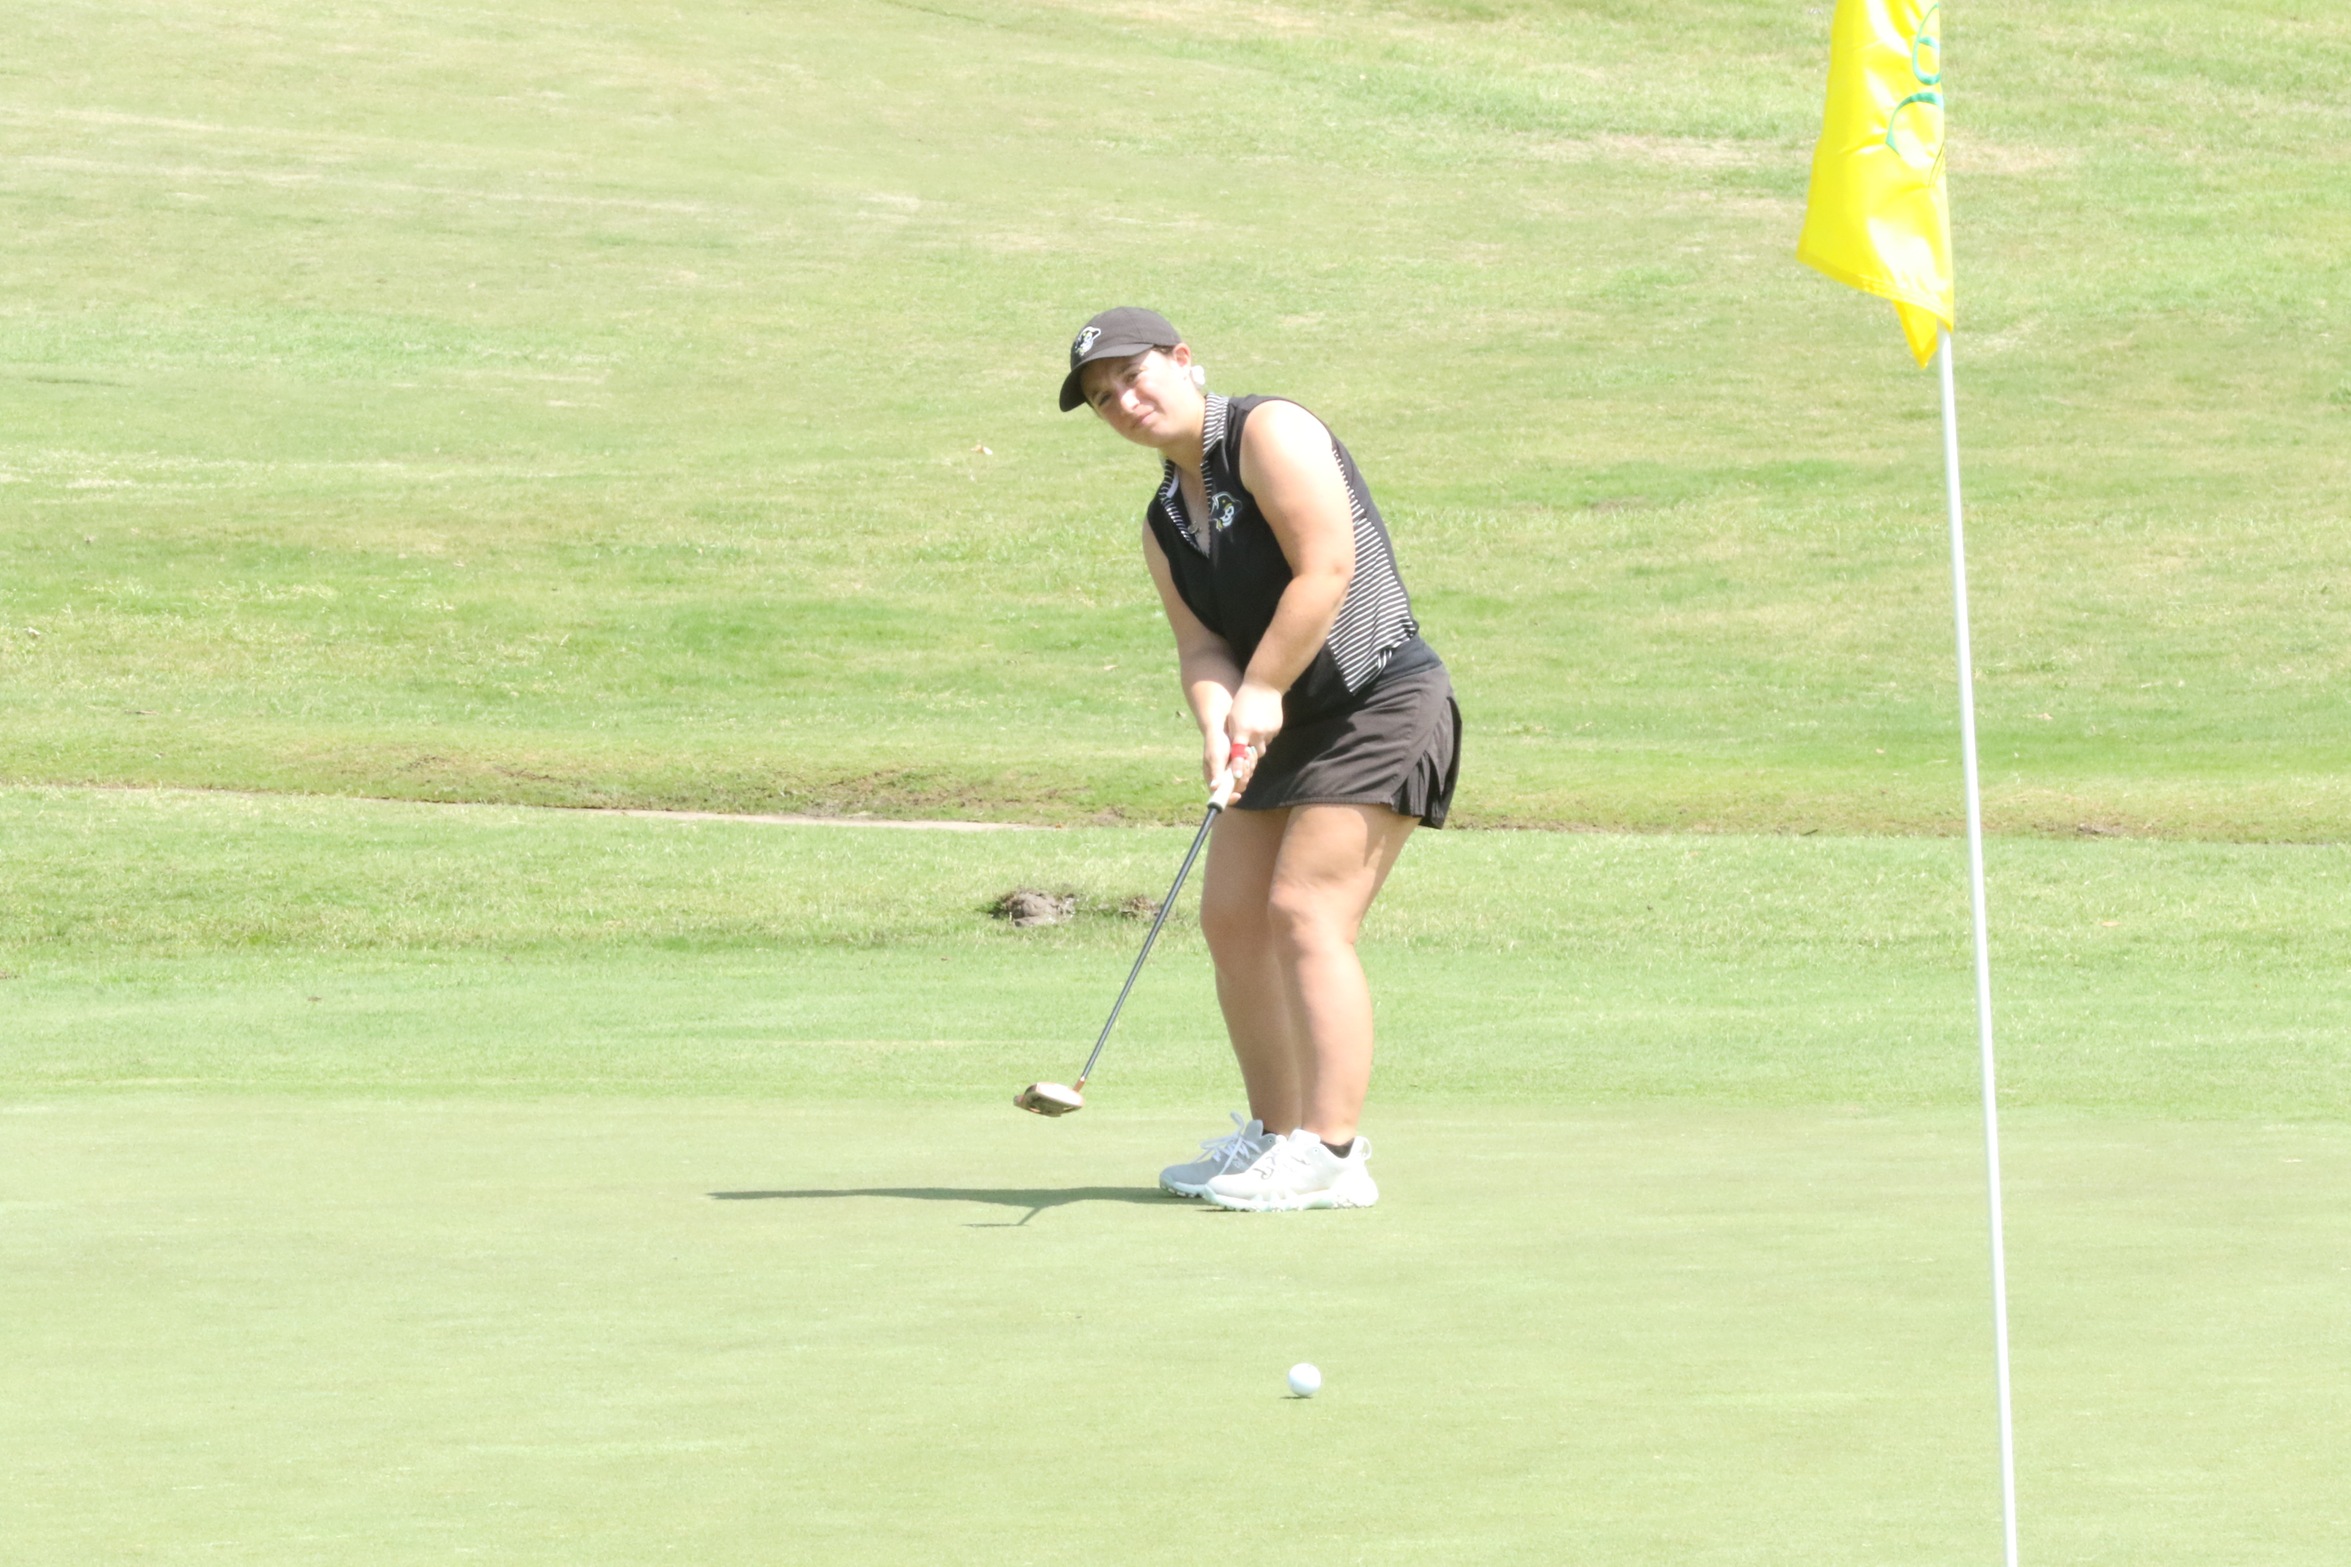 Erickson Ties for Second, Leads Pirates to Third Place at West Region Invitational